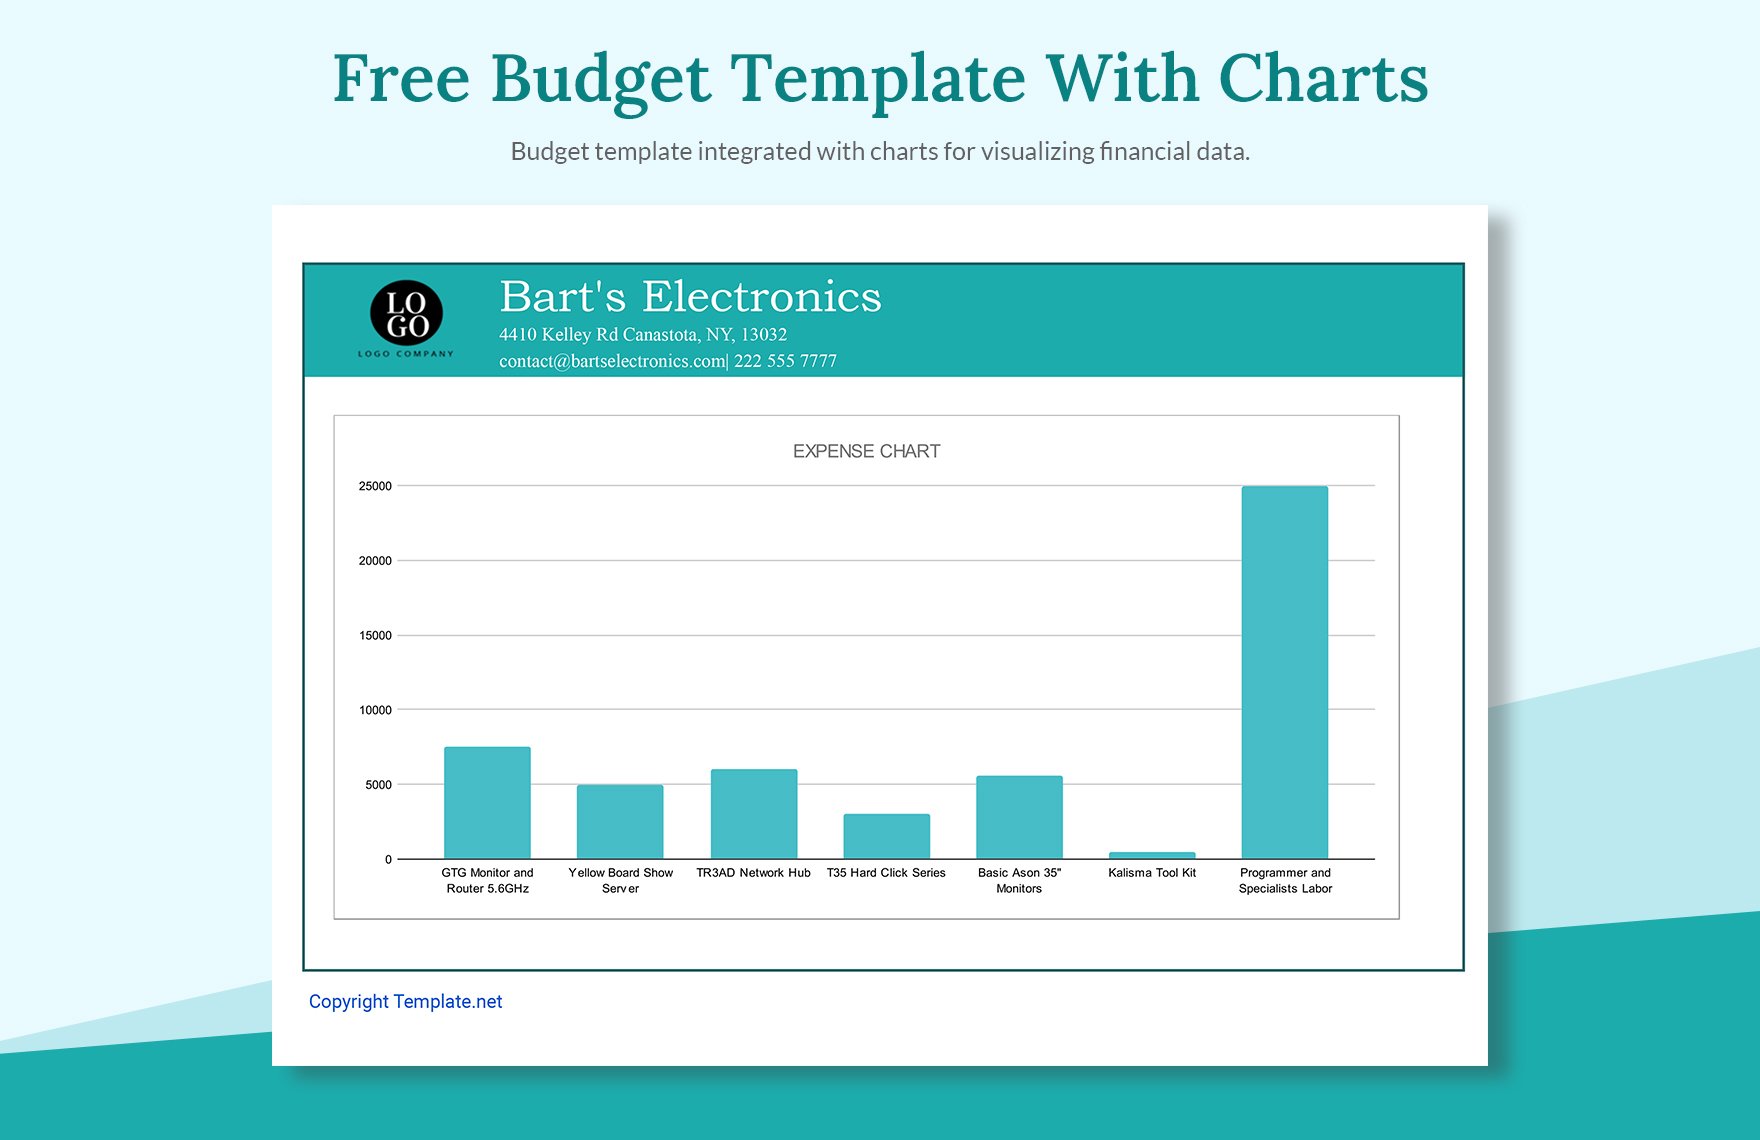 Budget Template With Charts